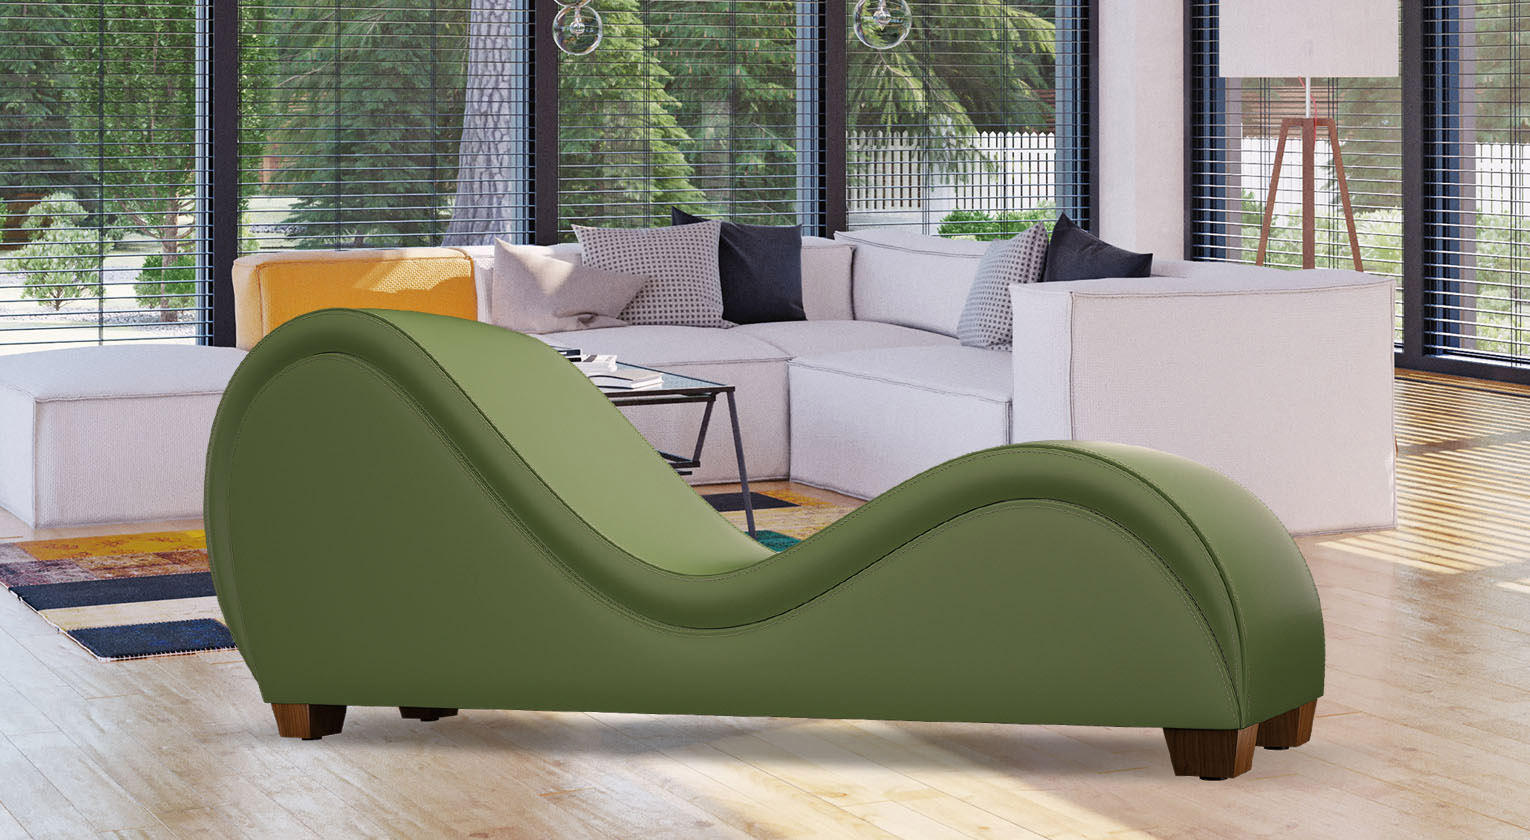 The Tantra Chair in a modern living room.